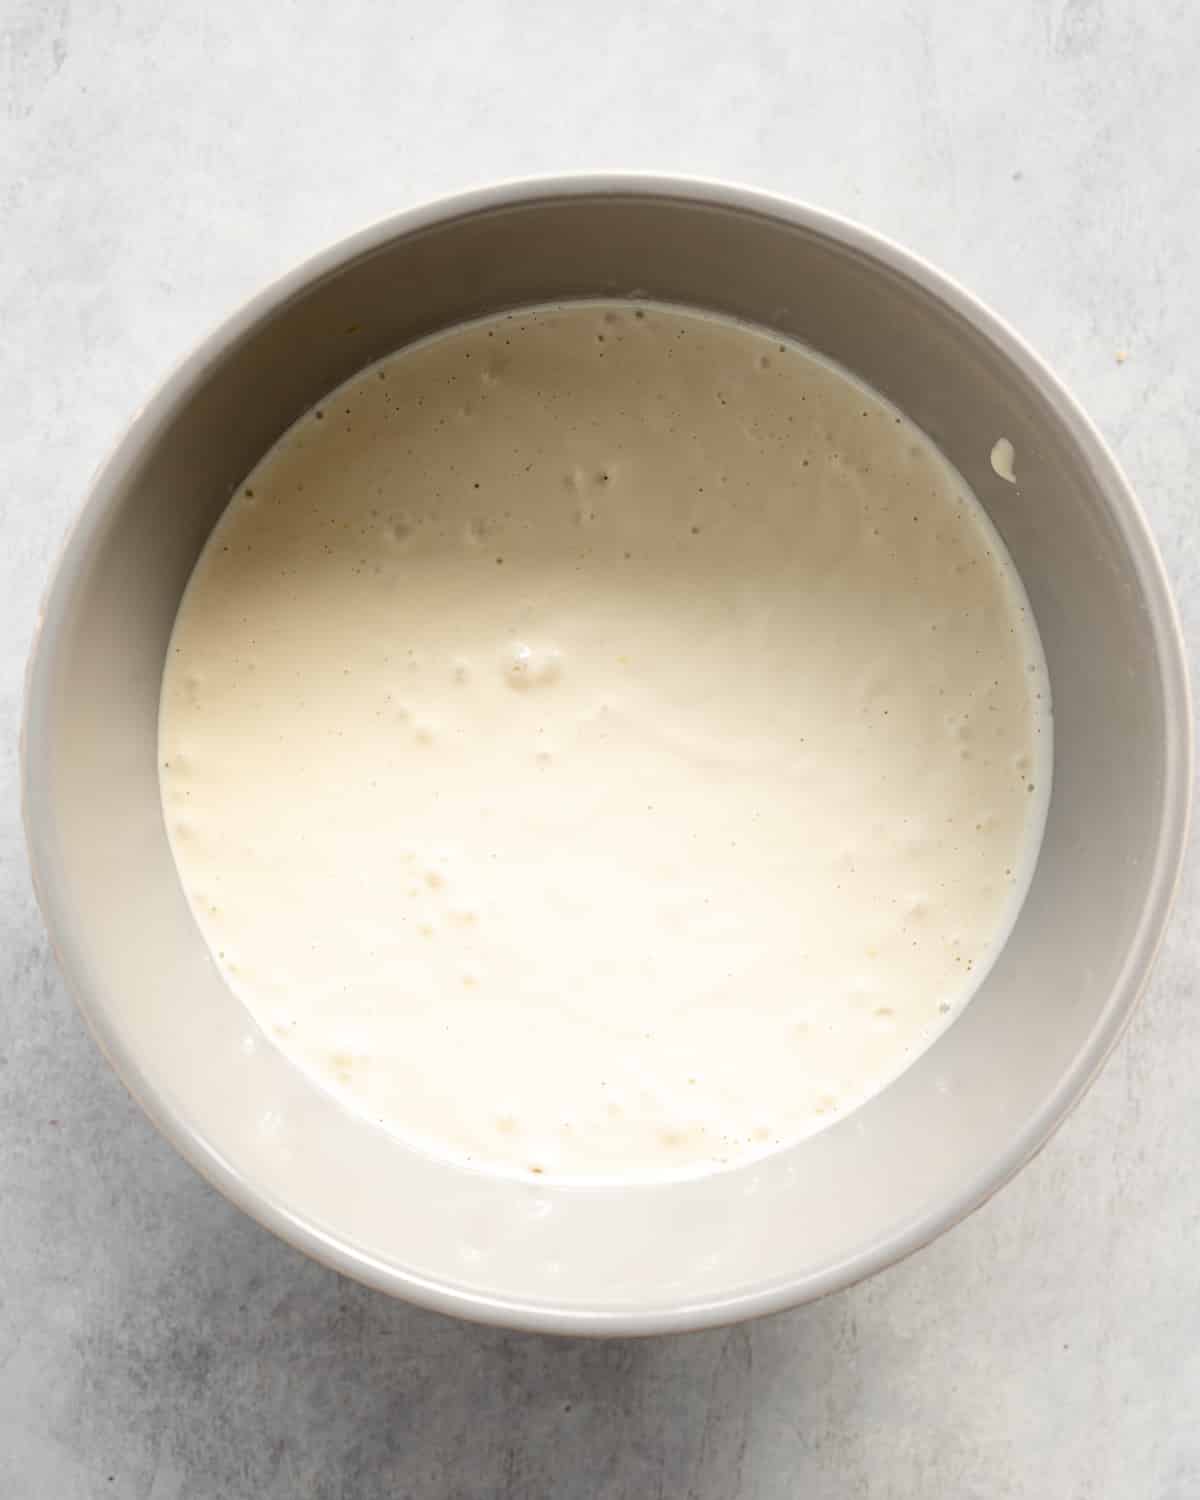 cheesecake filling in a grey bowl.